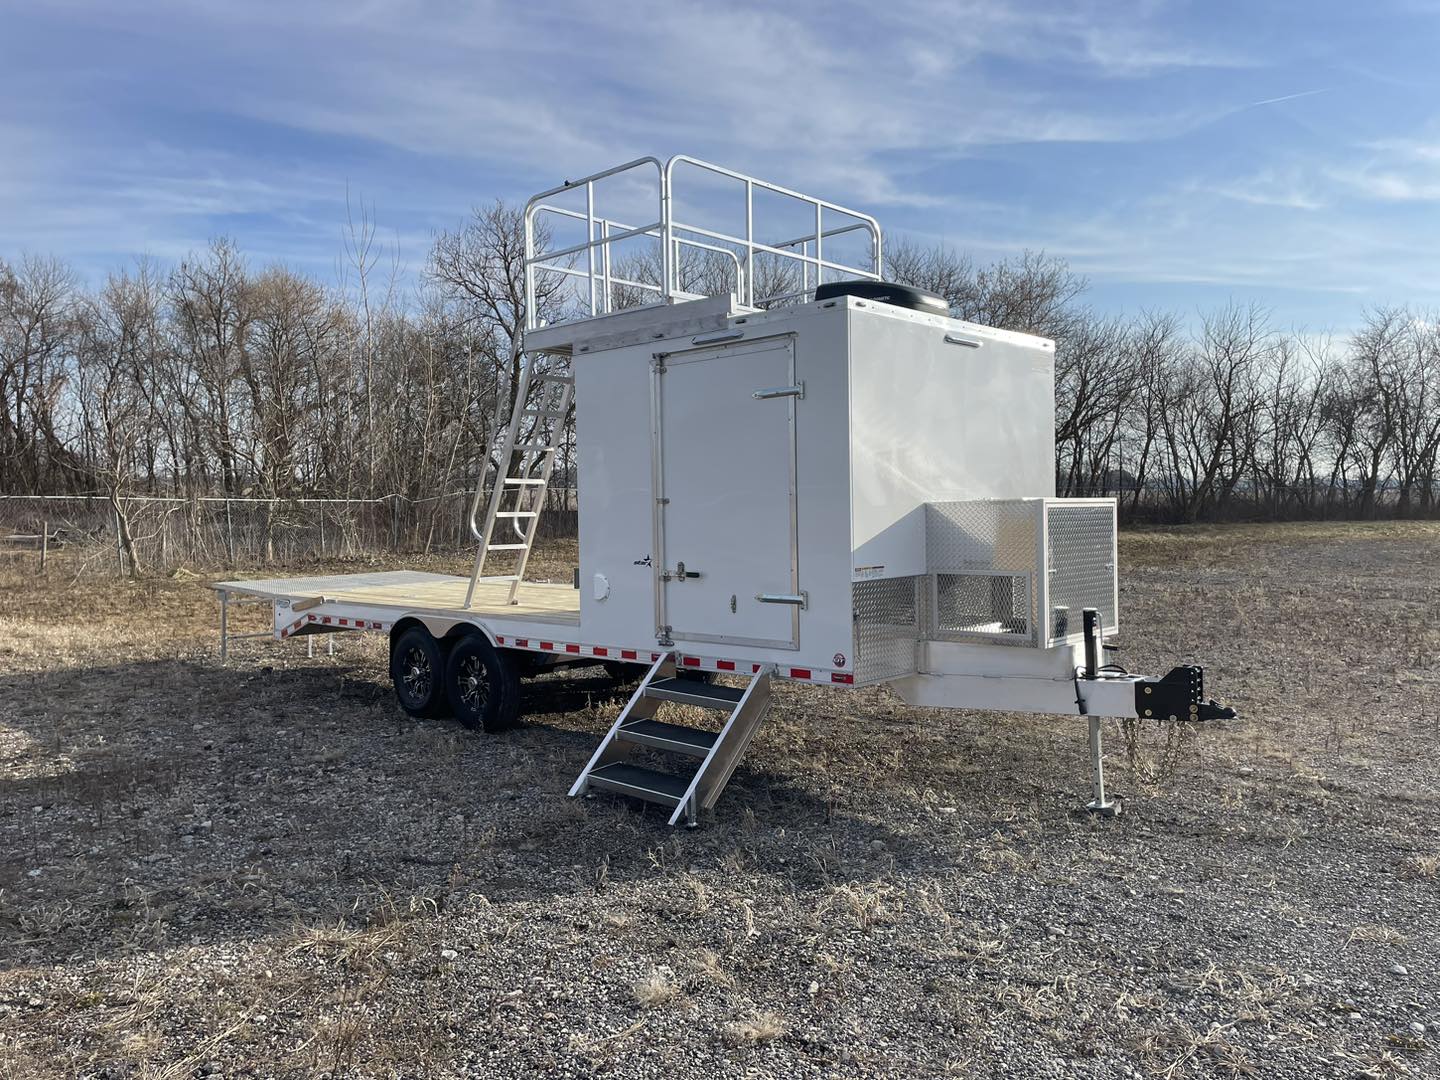 AcuSpray's A450 drone trailer in a field, featuring no-roof structure for easy landings, rear platform for docking, and elevated deck for efficient loading, designed to enhance precision agriculture.